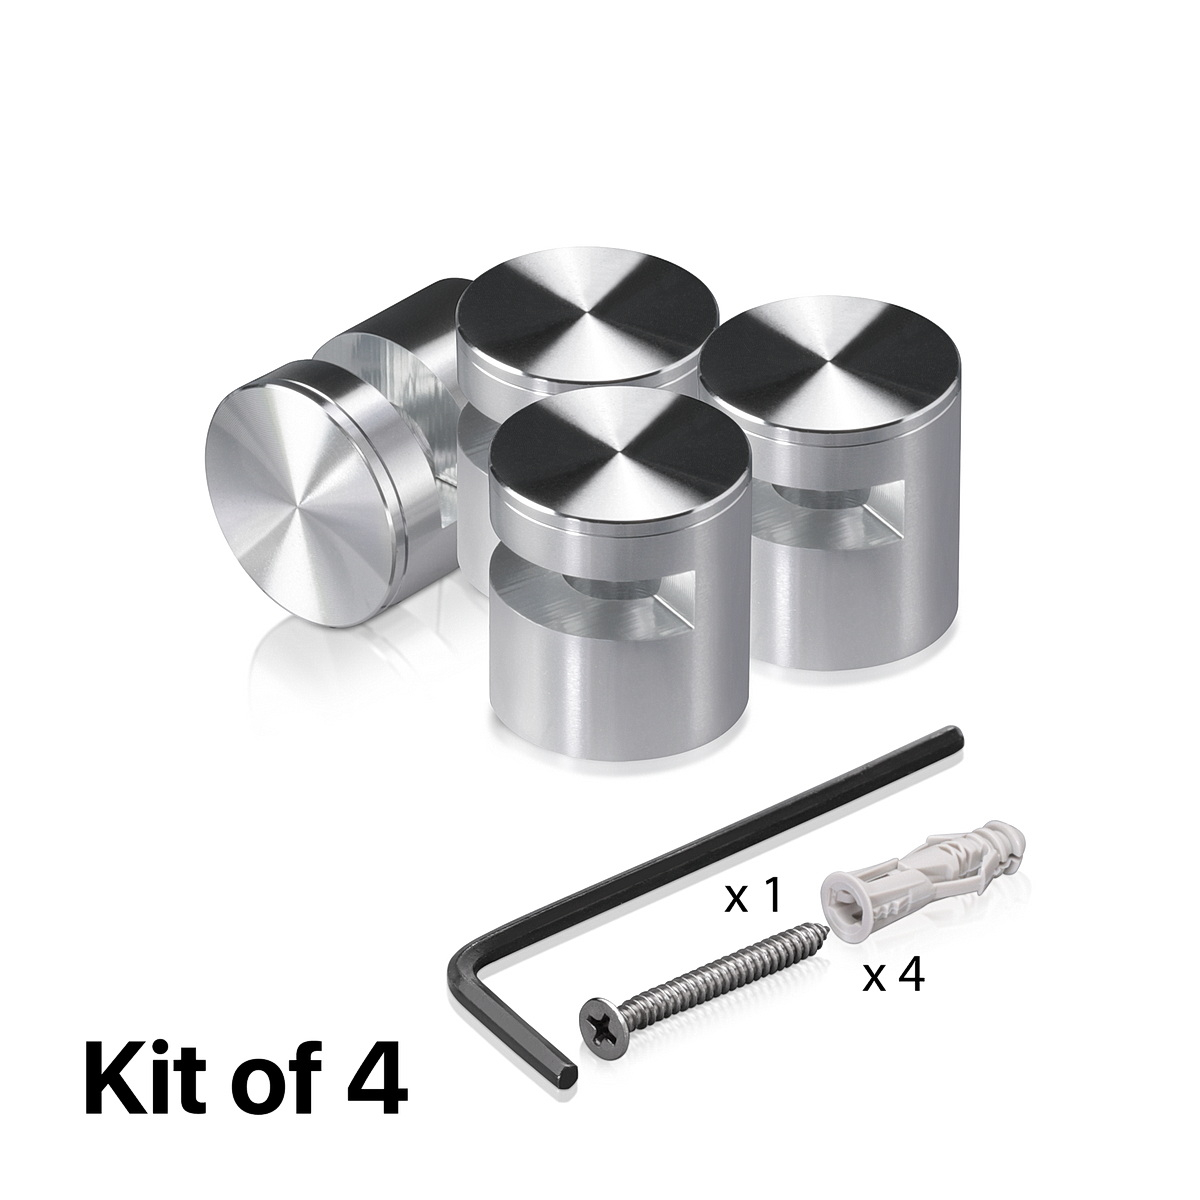 (Set of 4) 1'' Diameter X 9/16'' Barrel Length, Aluminum Clear Shiny Anodized Finish. Easy Fasten Edge Grip Standoff with (4) 2216Z Screws and (4) LANC1 Anchors for concrete or drywall (For Inside Use Only)